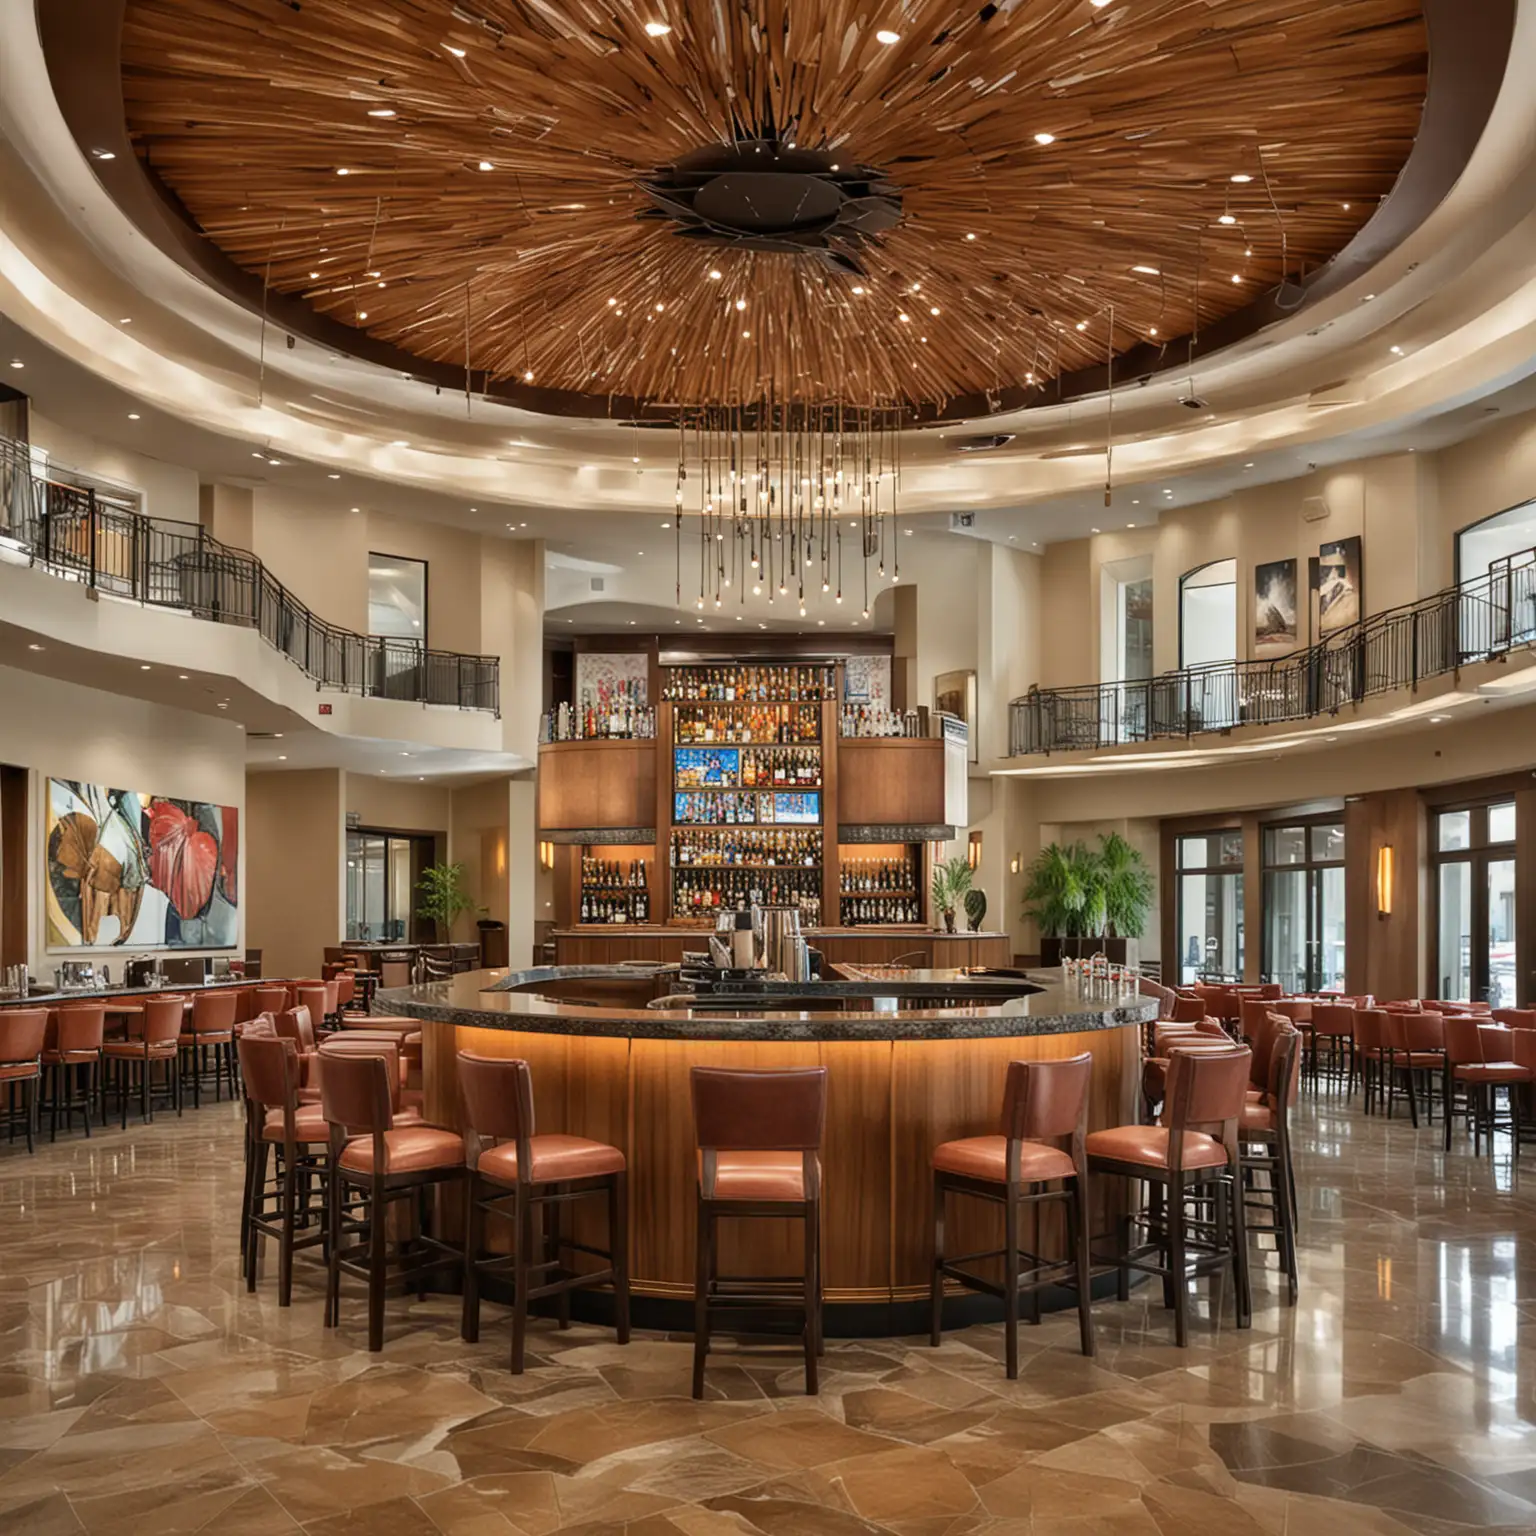 Modern Hotel Lobby Bar with Artistic Ceiling Display and Circular Seating Arrangement